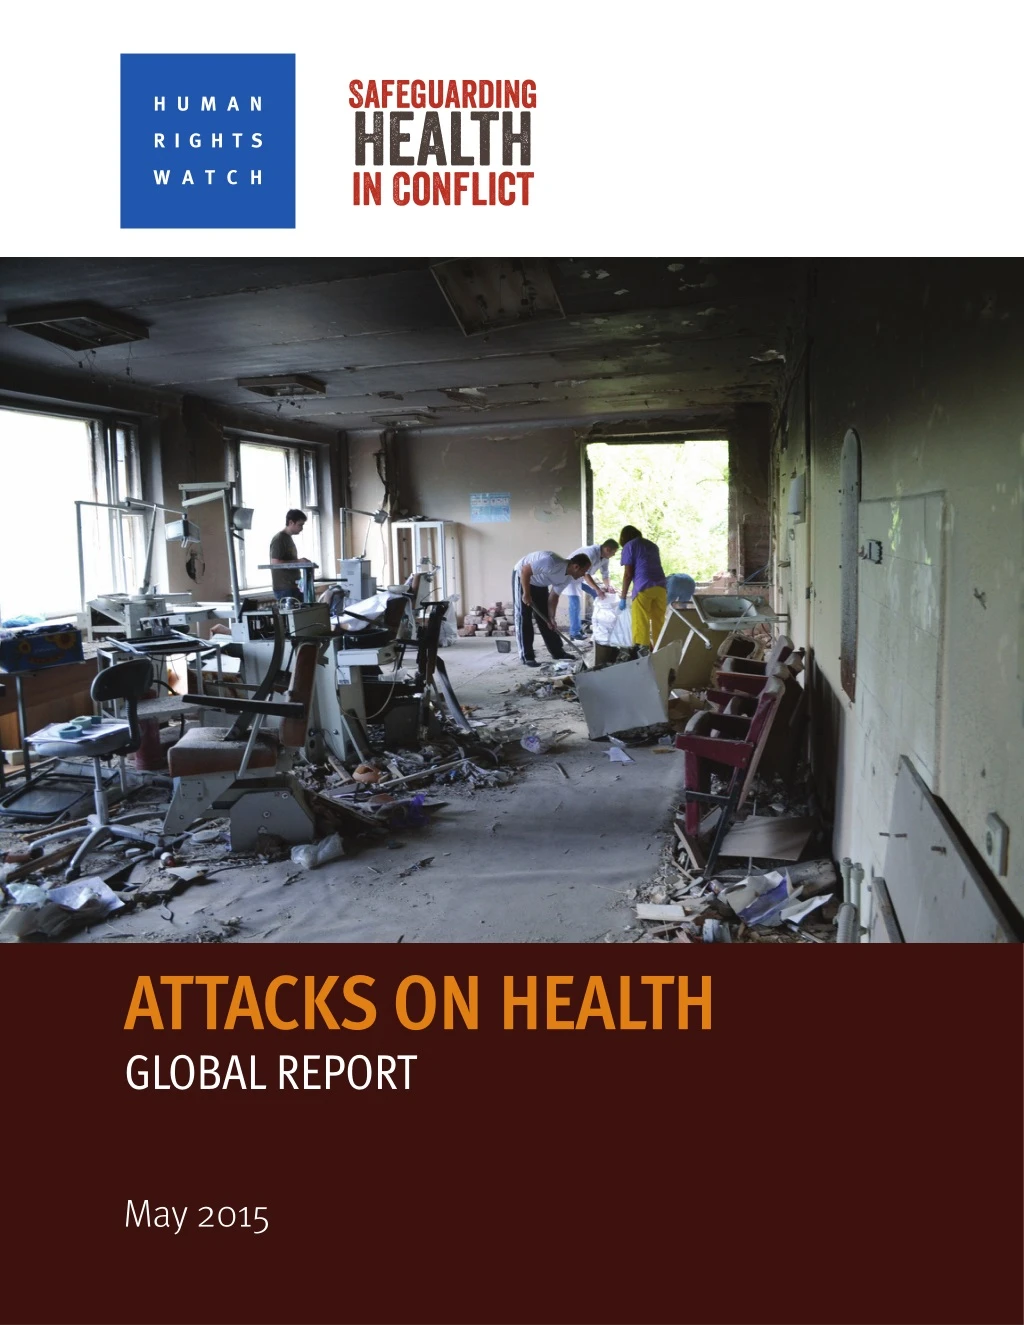 safeguarding health in conflict